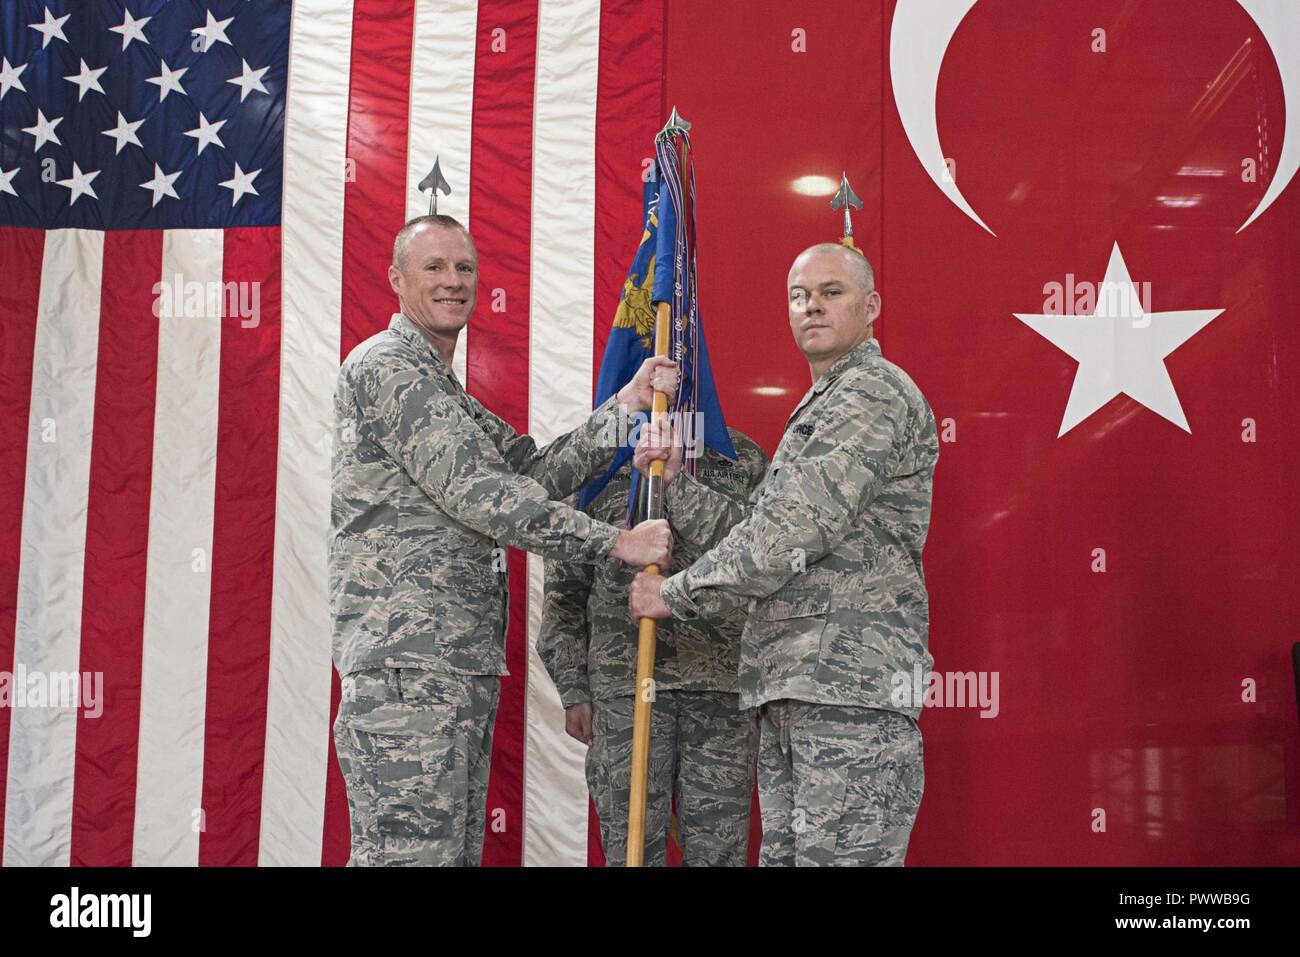 U.S. Air Force Col. Todd Stratton, 39th Mission Support Group commander, passes the guidon to Maj. Matthew Shaw, incoming 39th Logistics Readiness Squadron commander June 29, 2017, at Incirlik Air Base, Turkey. Stratton presided over the change of command. Stock Photo